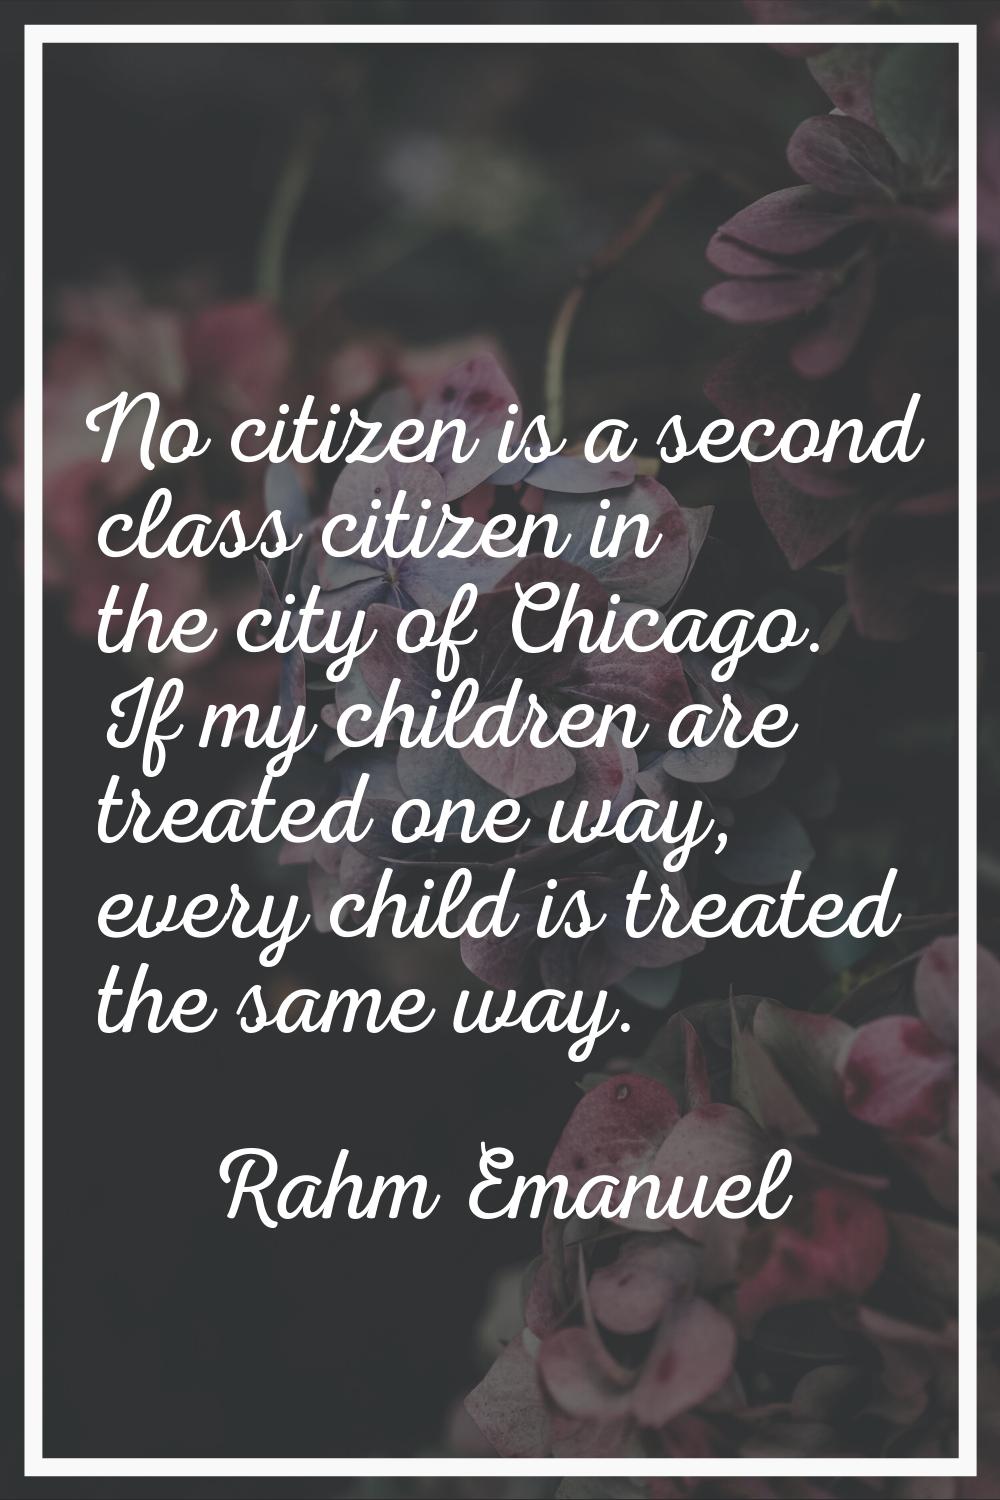 No citizen is a second class citizen in the city of Chicago. If my children are treated one way, ev